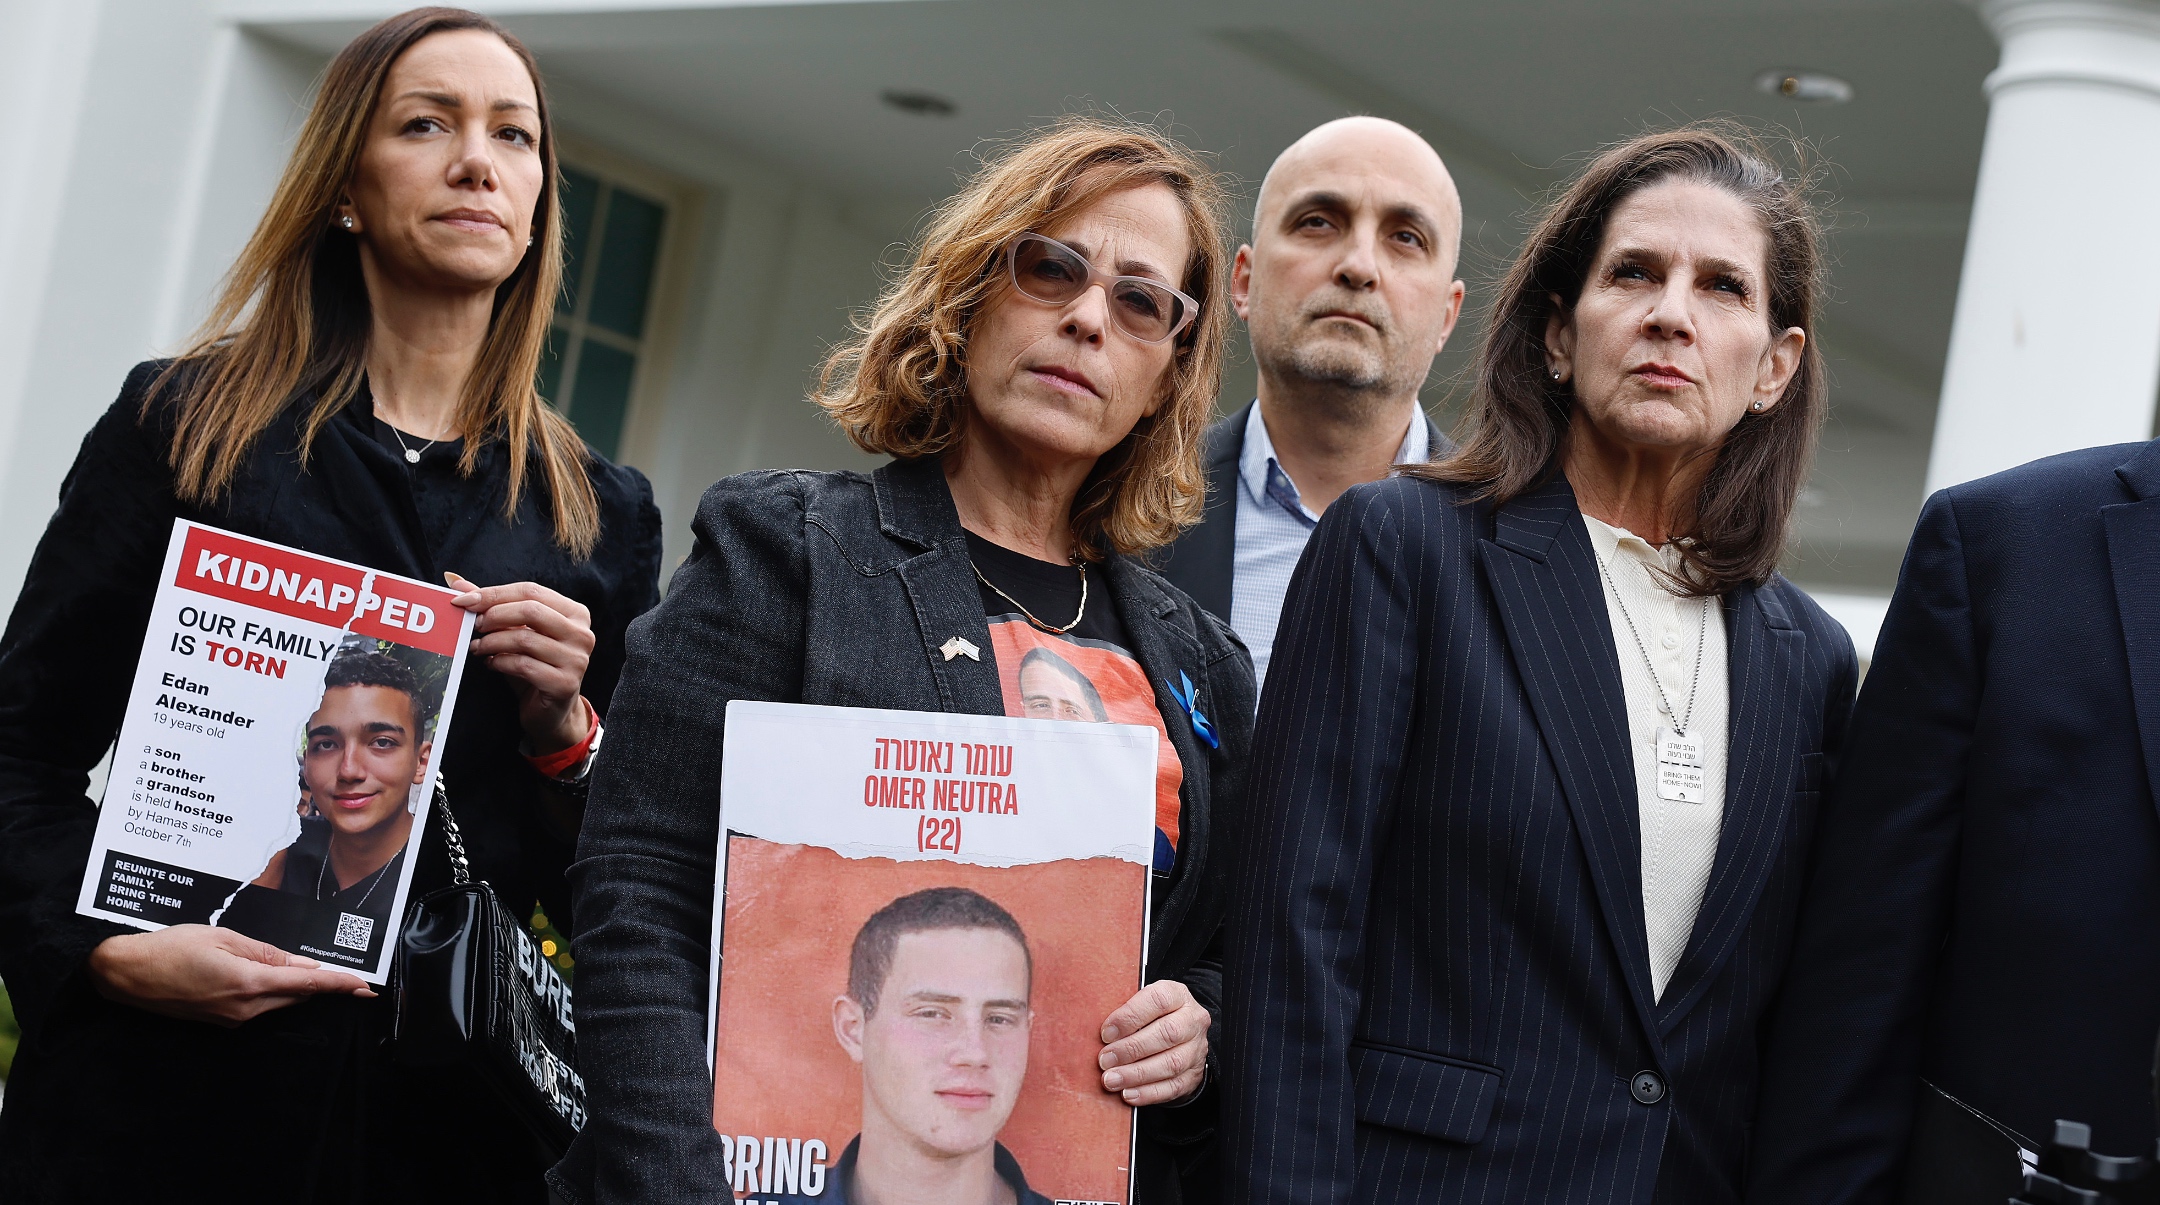 Family members of Americans who were taken hostage by Hamas during the terrorist attacks in Israel on Oct. 7, including, left to right, Yael Alexander, Orna Neutra, Adi Alexander and Liz Naftali talk to reporters outside the West Wing of the White House, Dec. 13, 2023. (Chip Somodevilla/Getty Images)